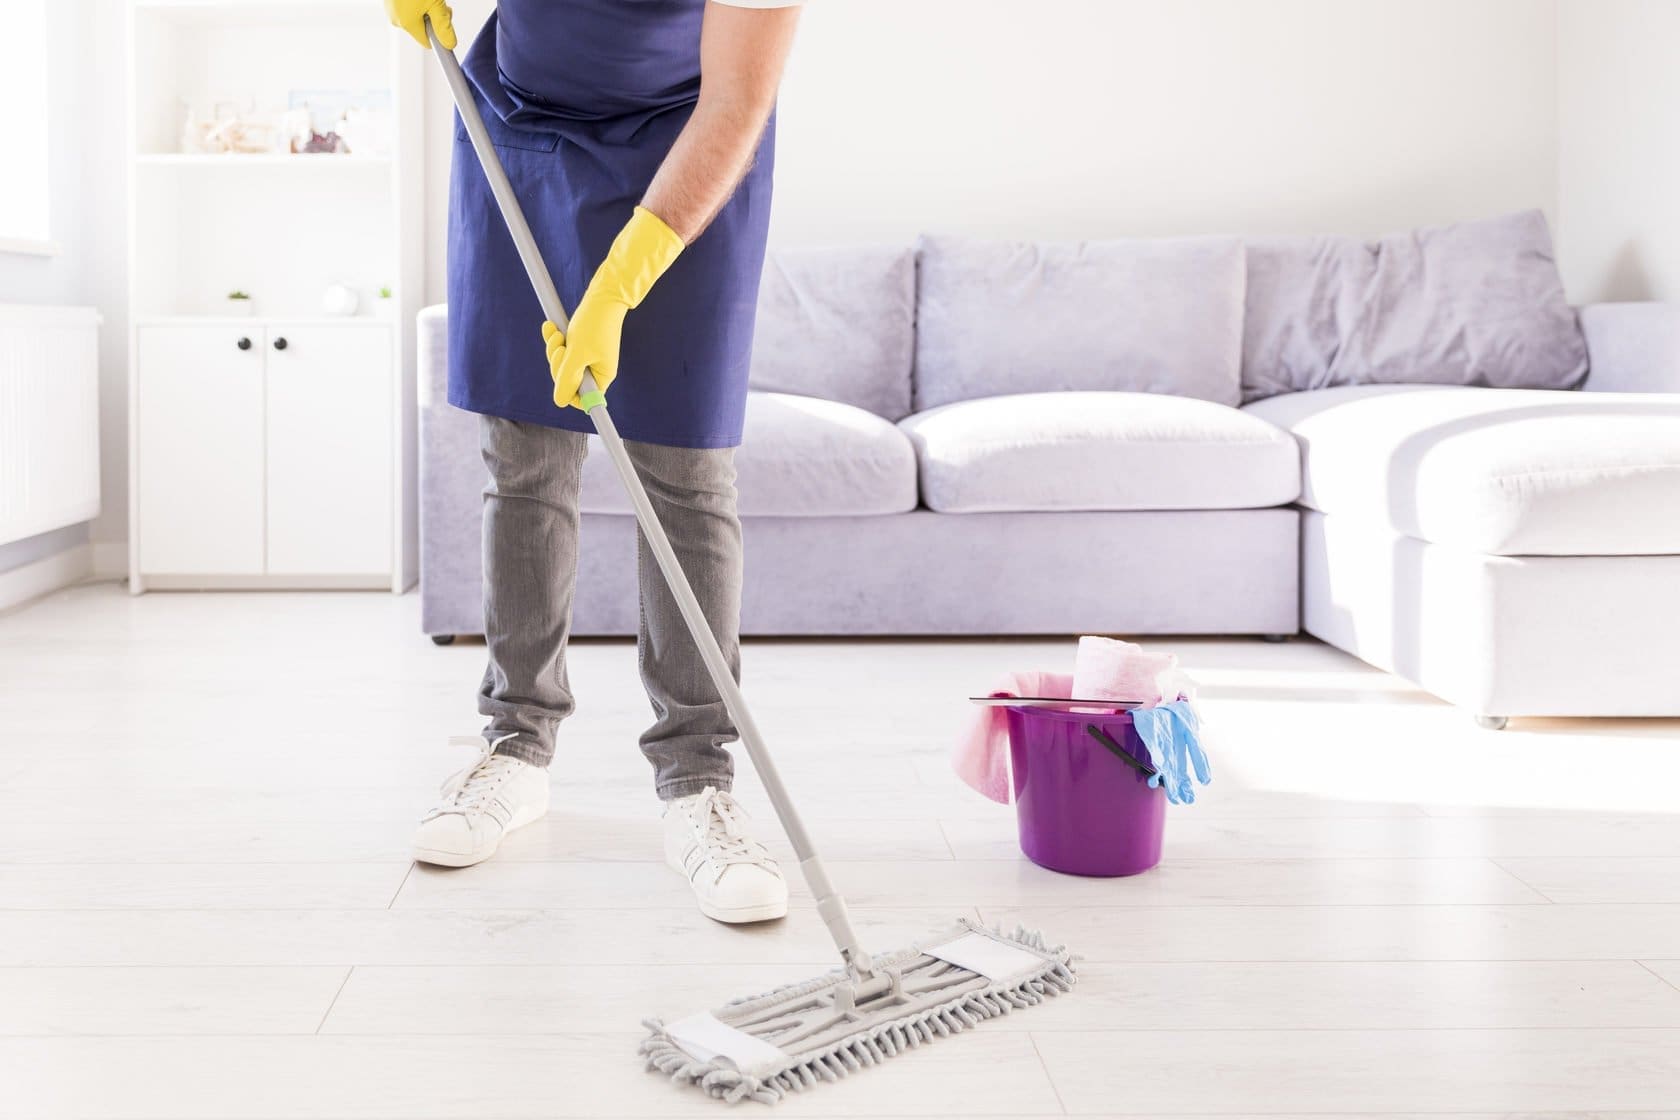 a person cleaning floor with mop.